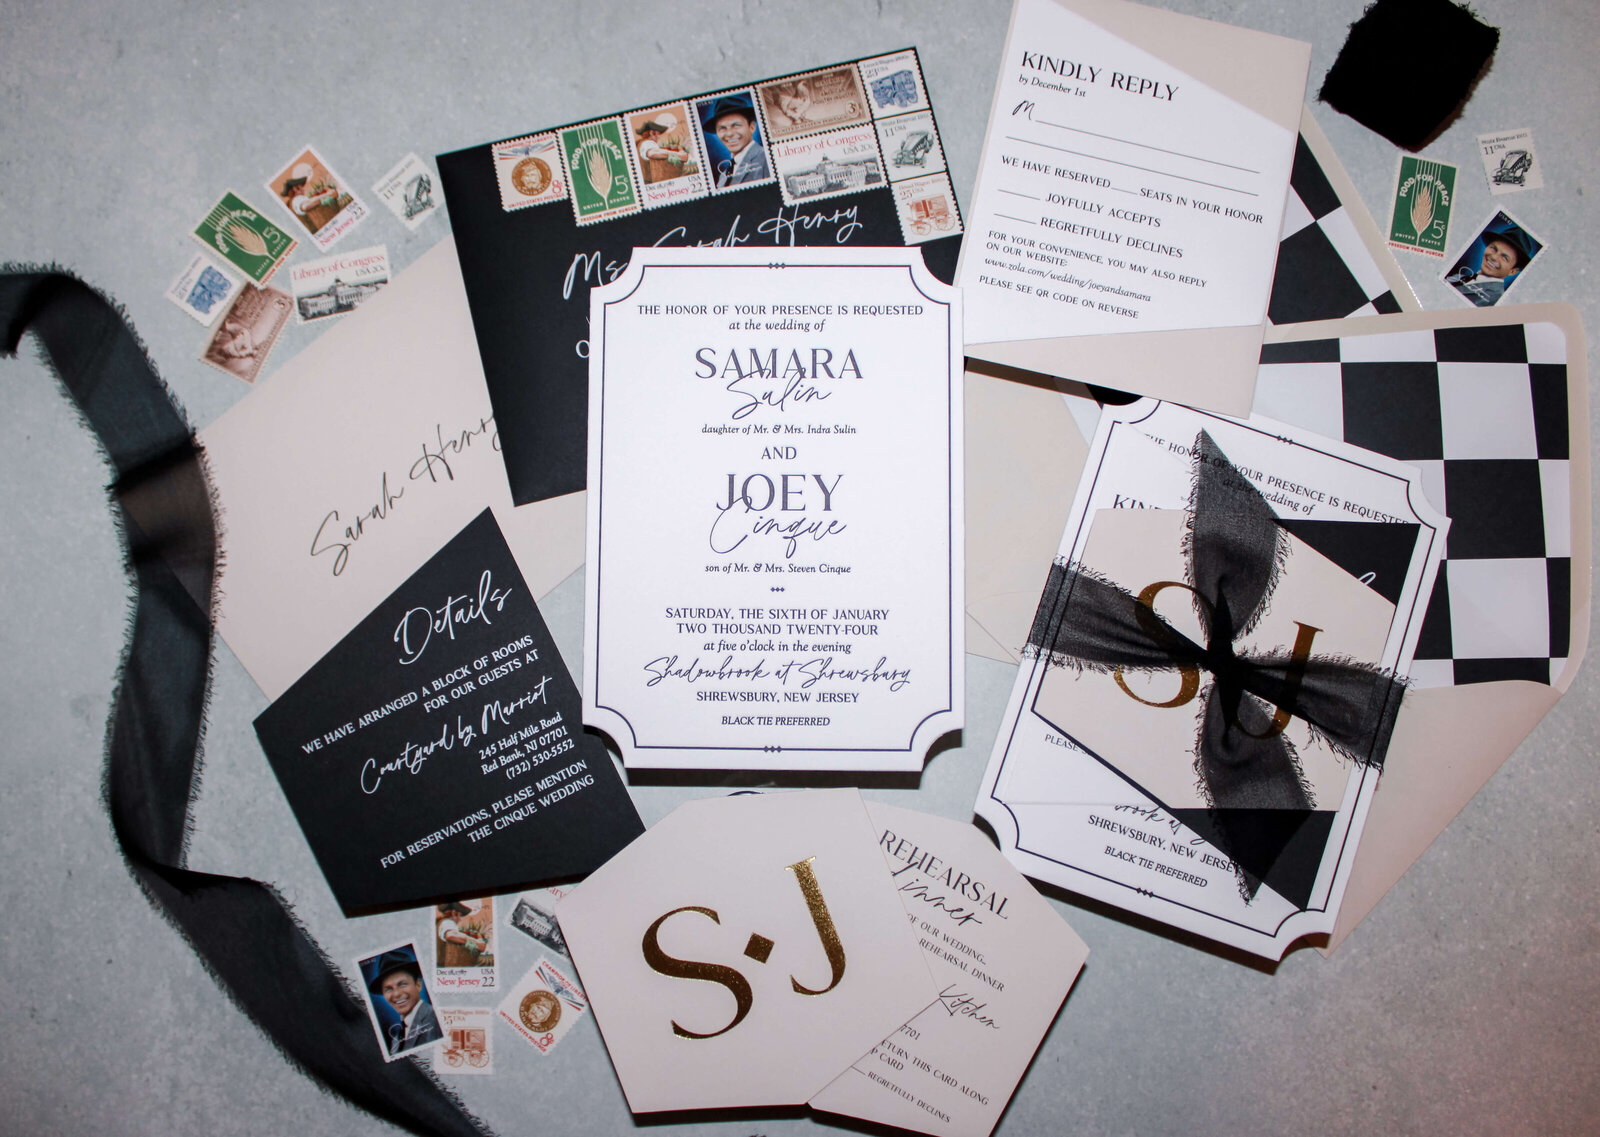 SGH Creative Luxury Wedding Signage & Stationery in New York & New Jersey - Full Gallery (105)